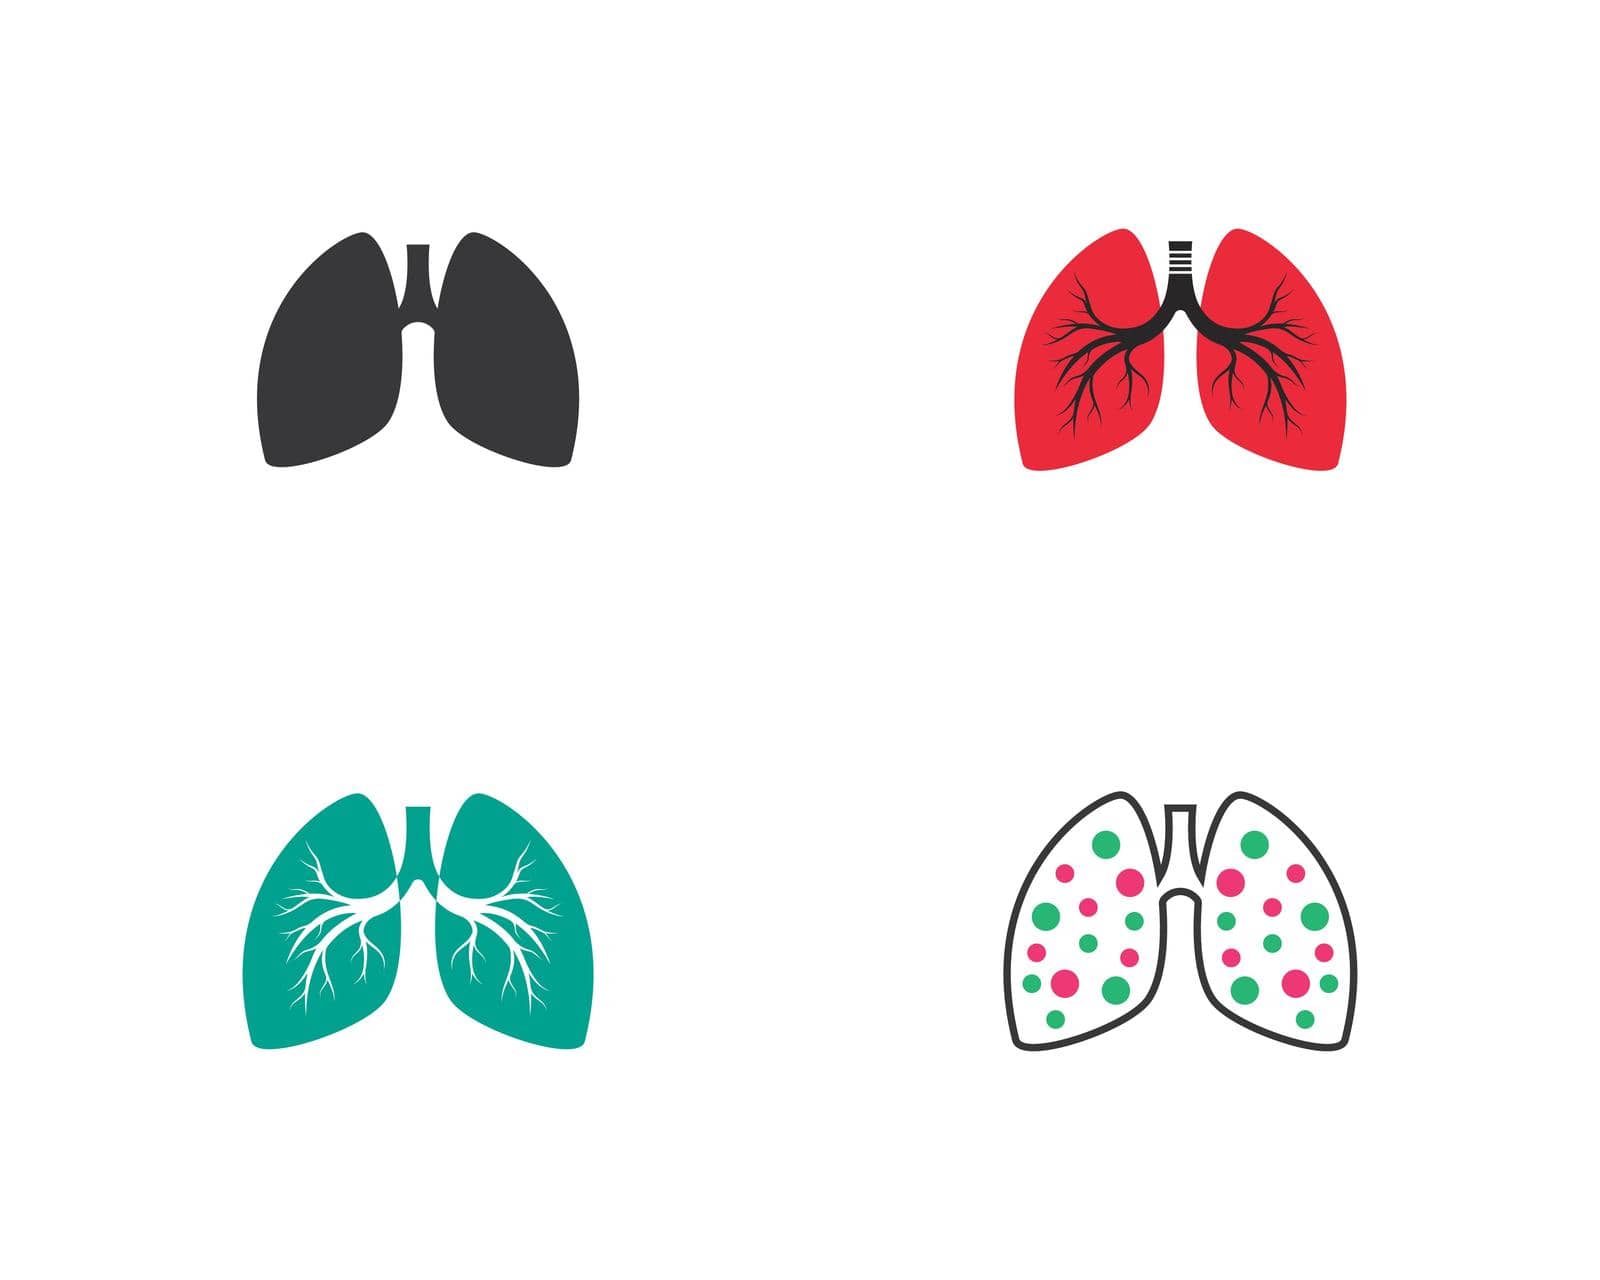 Lungs icon template vector icon illustration design